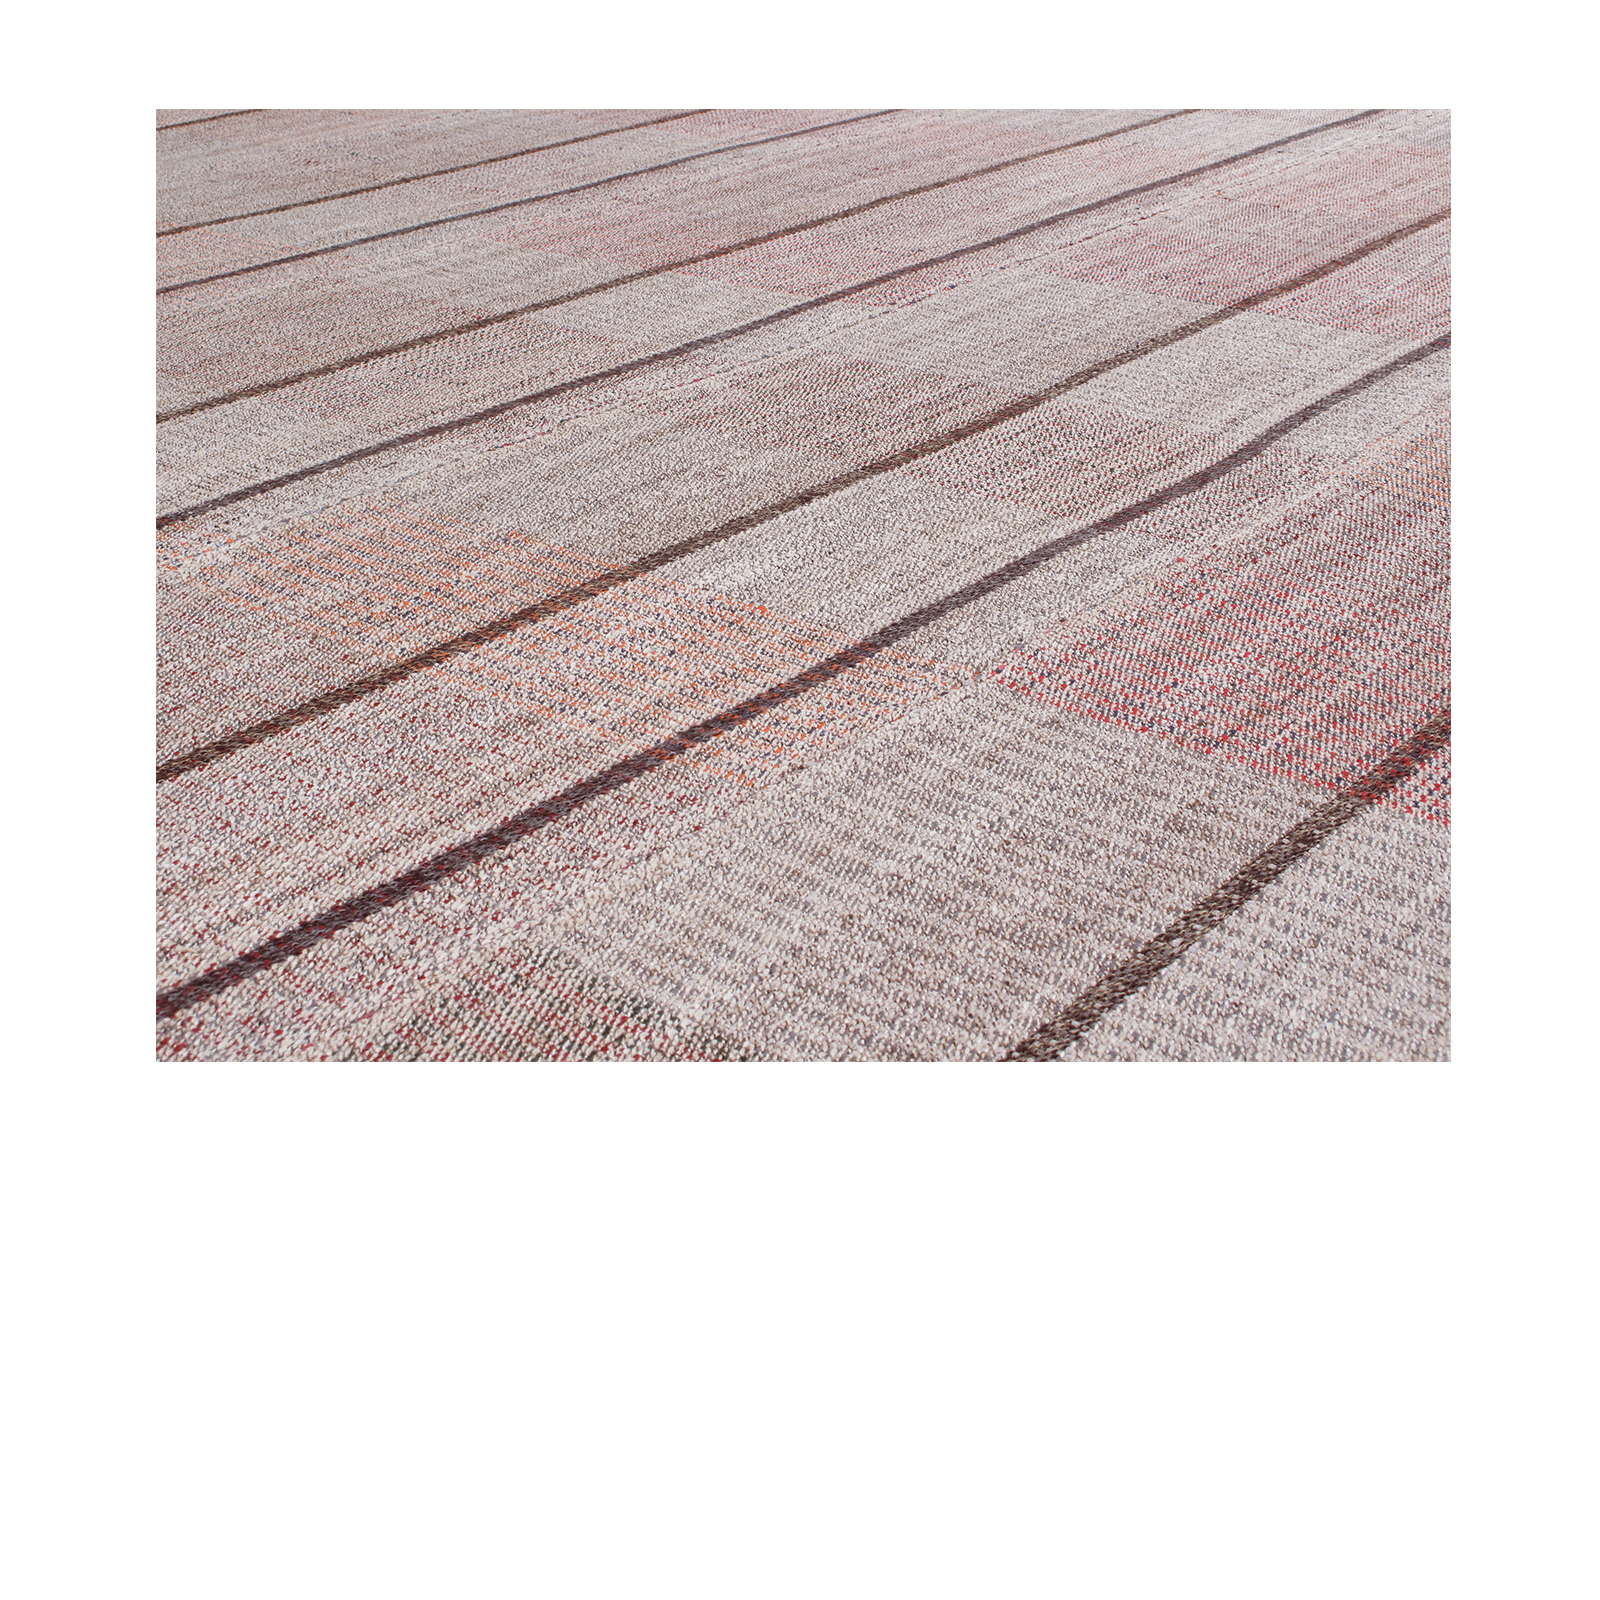 Pelas flatweave rug that is made with handspun wool and natural dyes